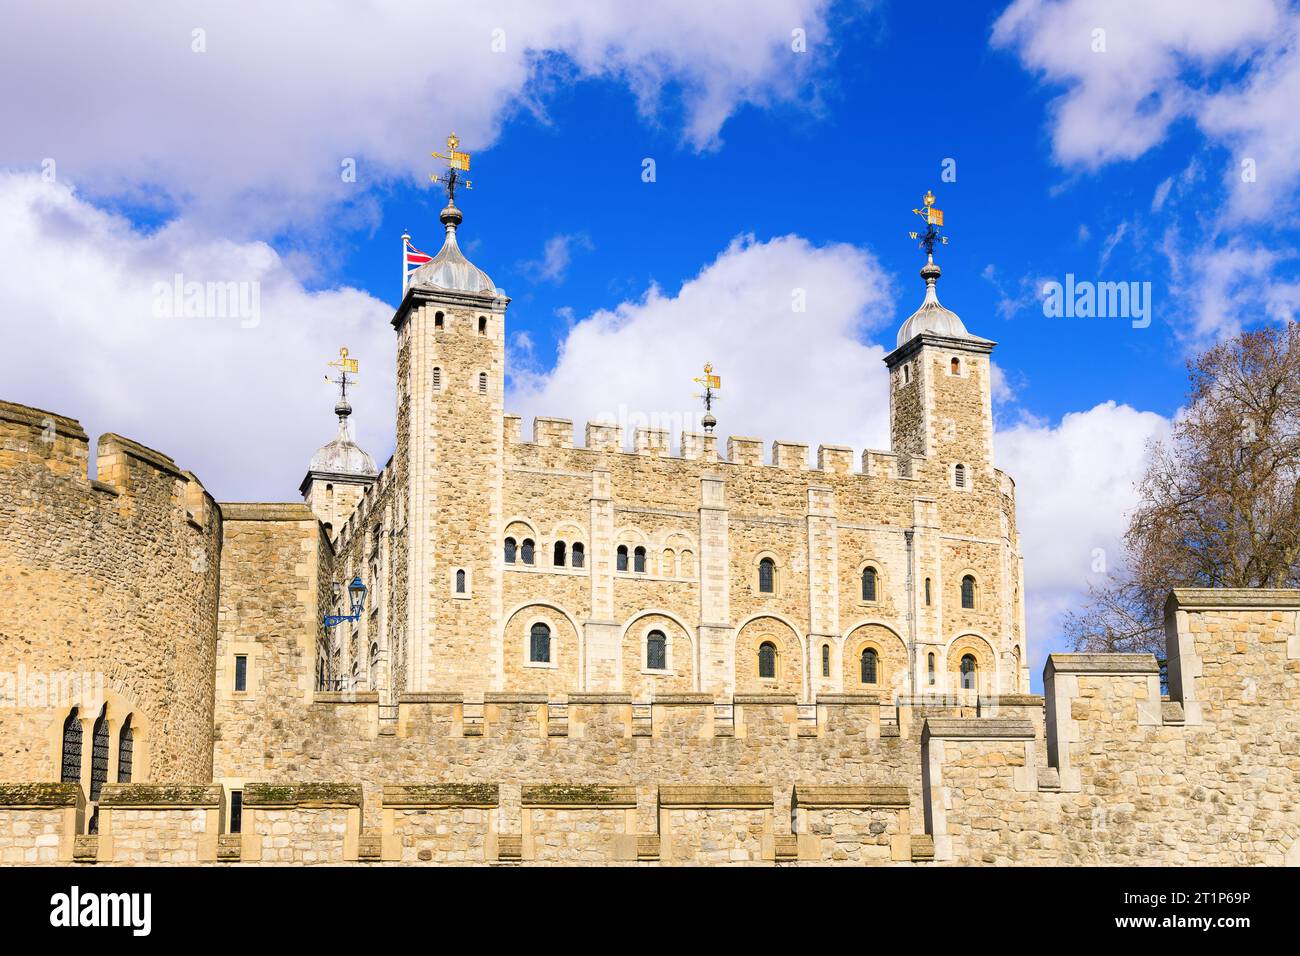 London, England, UK. Fortress of the Tower of London. Stock Photo